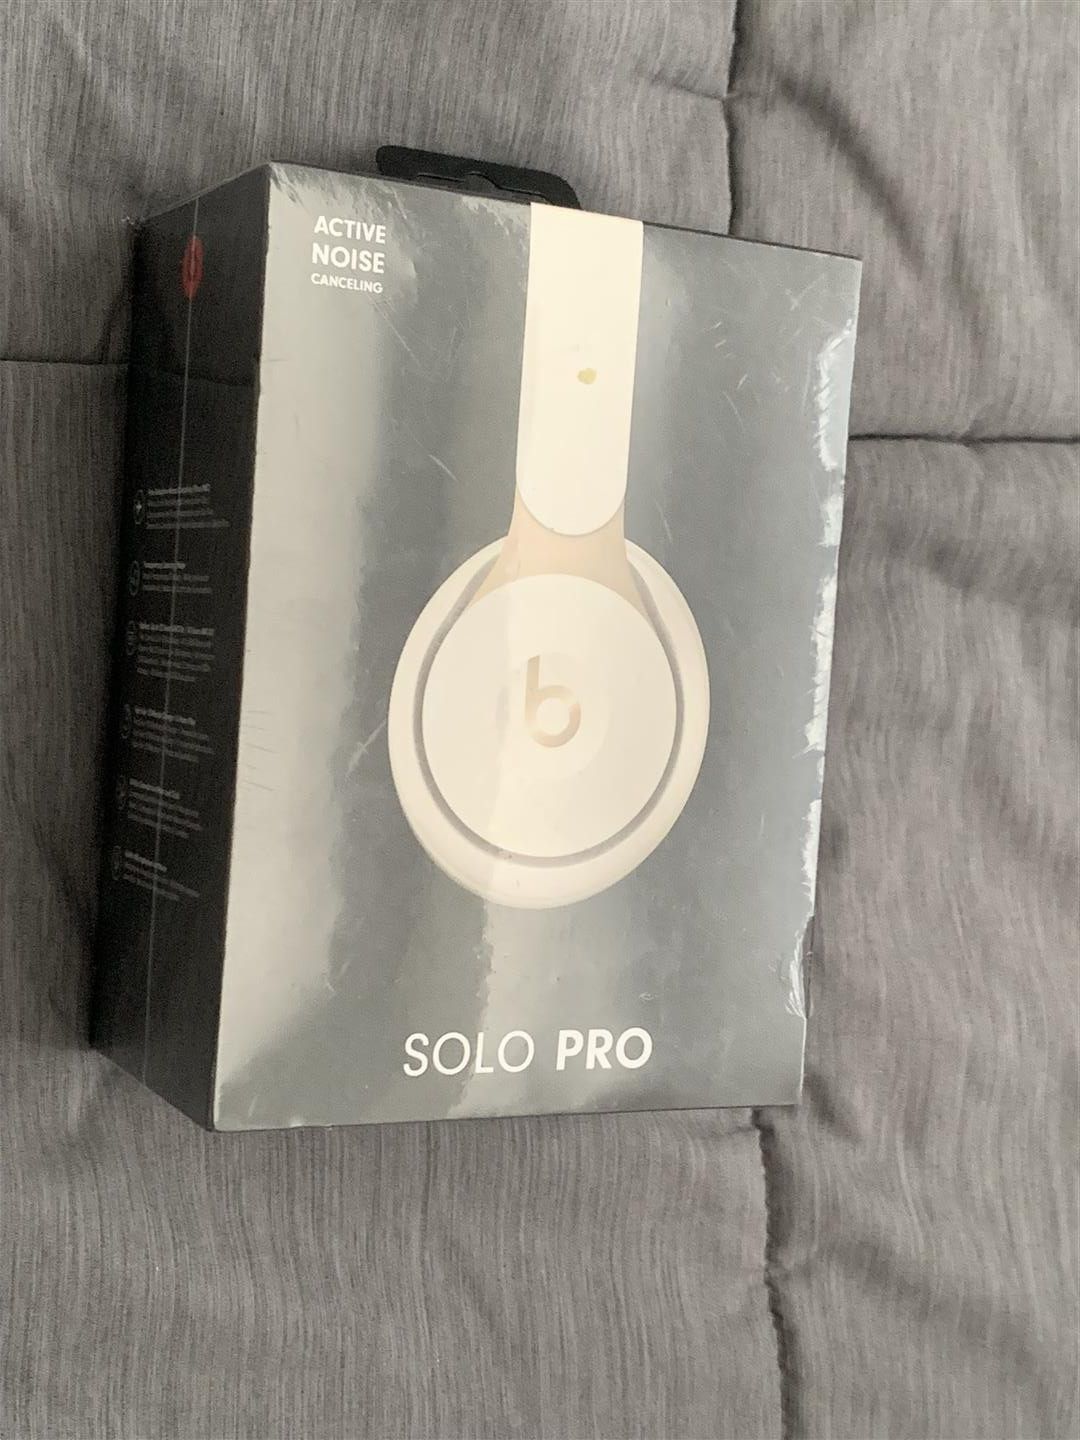 Beats by Dr. Dre - Solo Pro Wireless Noise Cancelling On-Ear Headphones /w Microphone - ORIGINAL Ivory